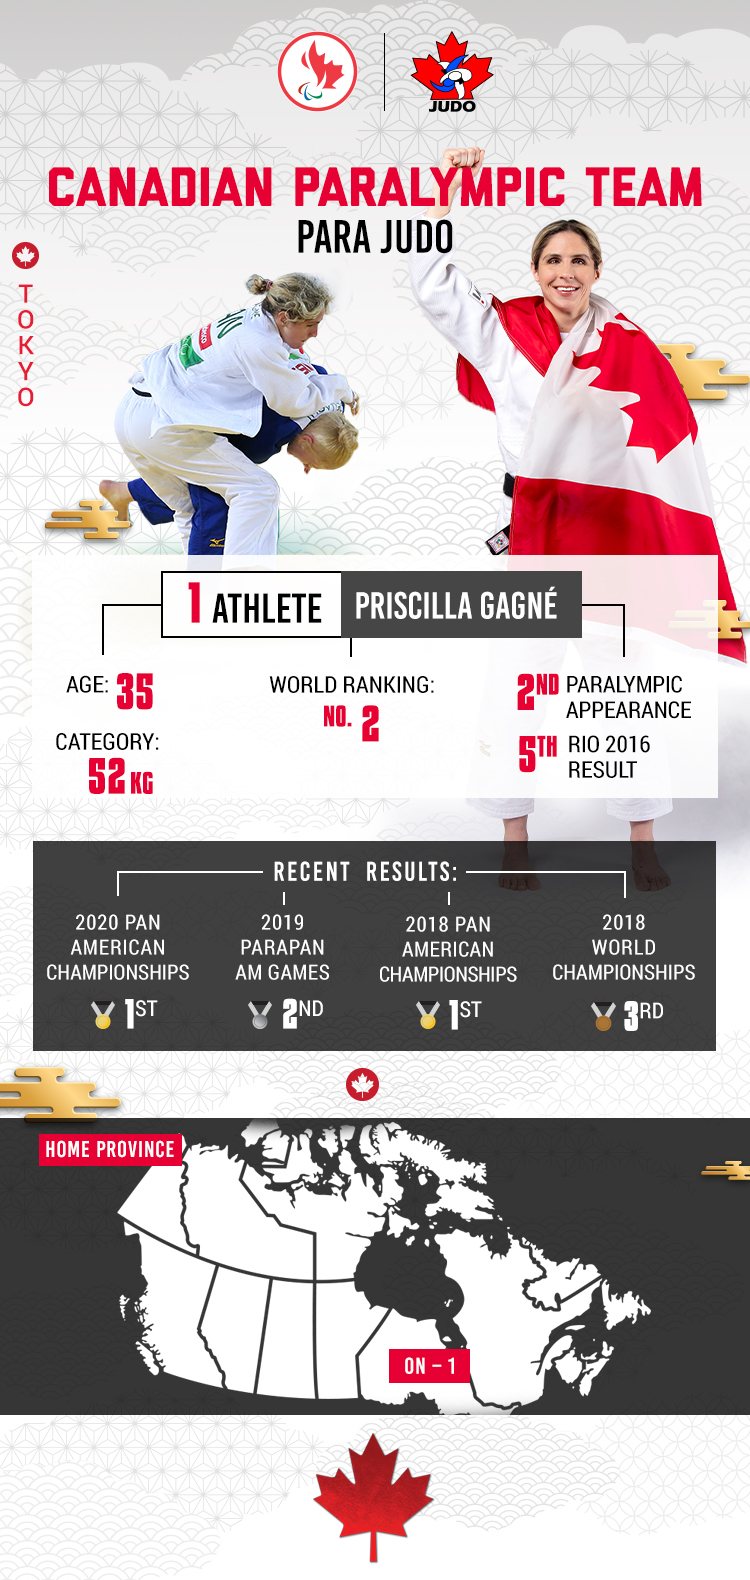 An infographic showing various stats about Priscilla Gagné, who will represent Canada in Para judo at the Tokyo 2020 Paralympic Games. 